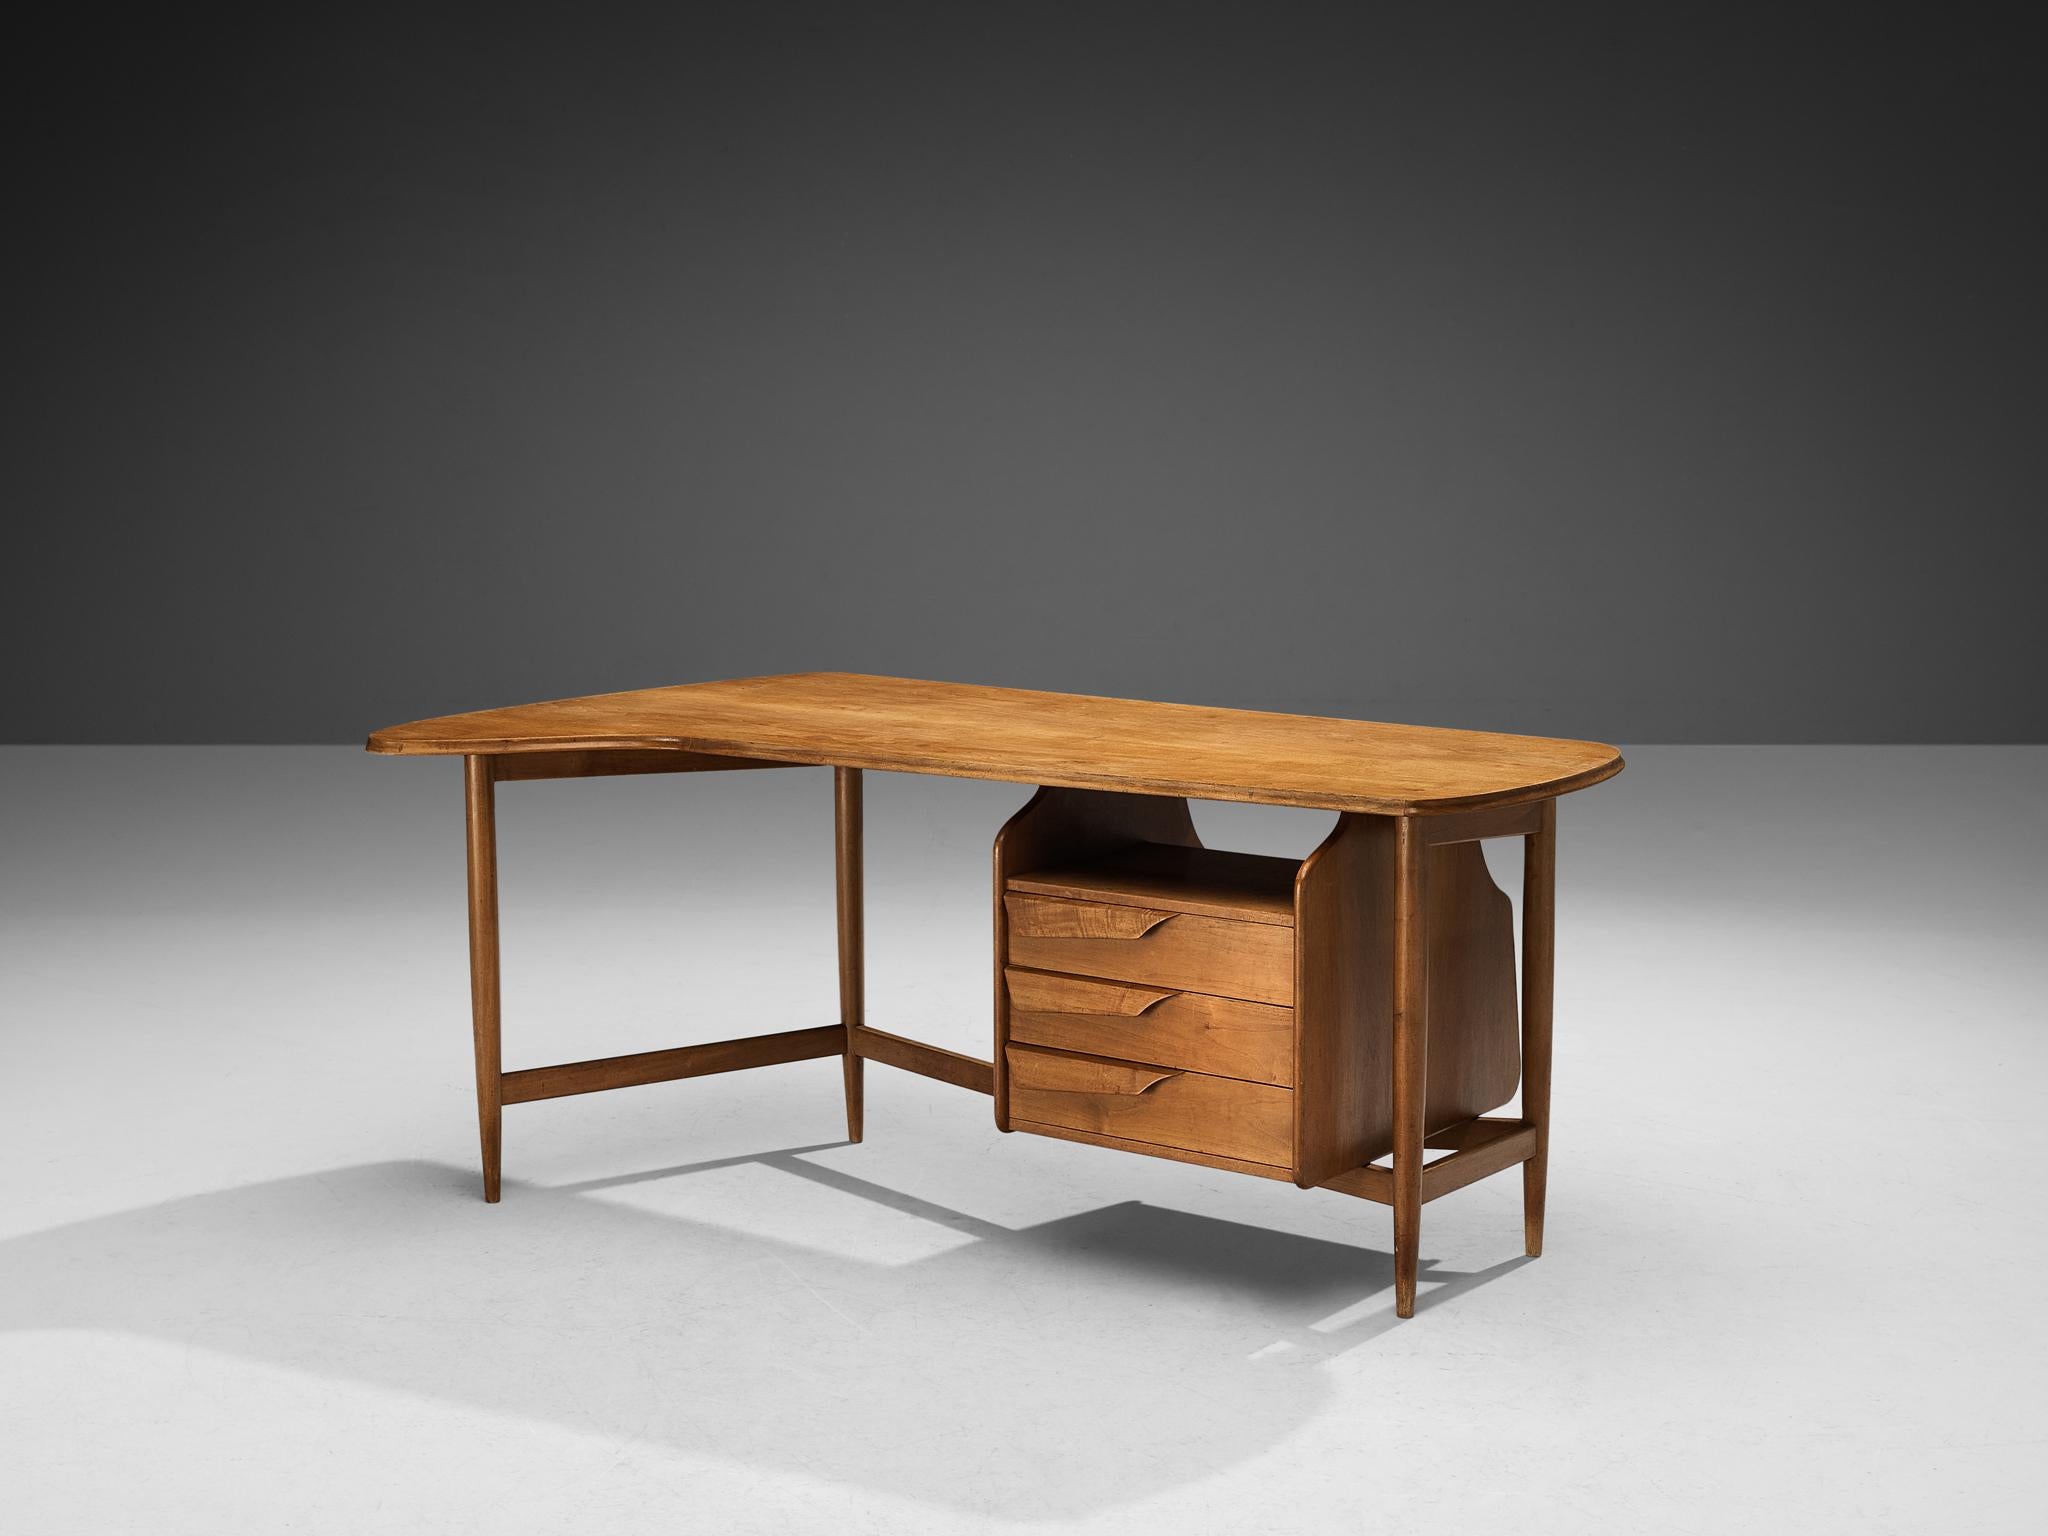 Guglielmo Pecorini, writing desk / table, walnut, Italy, 1945. 

This eccentric writing desk is well-constructed in a precise manner implementing geometrical shapes that contribute to its architectural appearance. The tabletop and compartment are